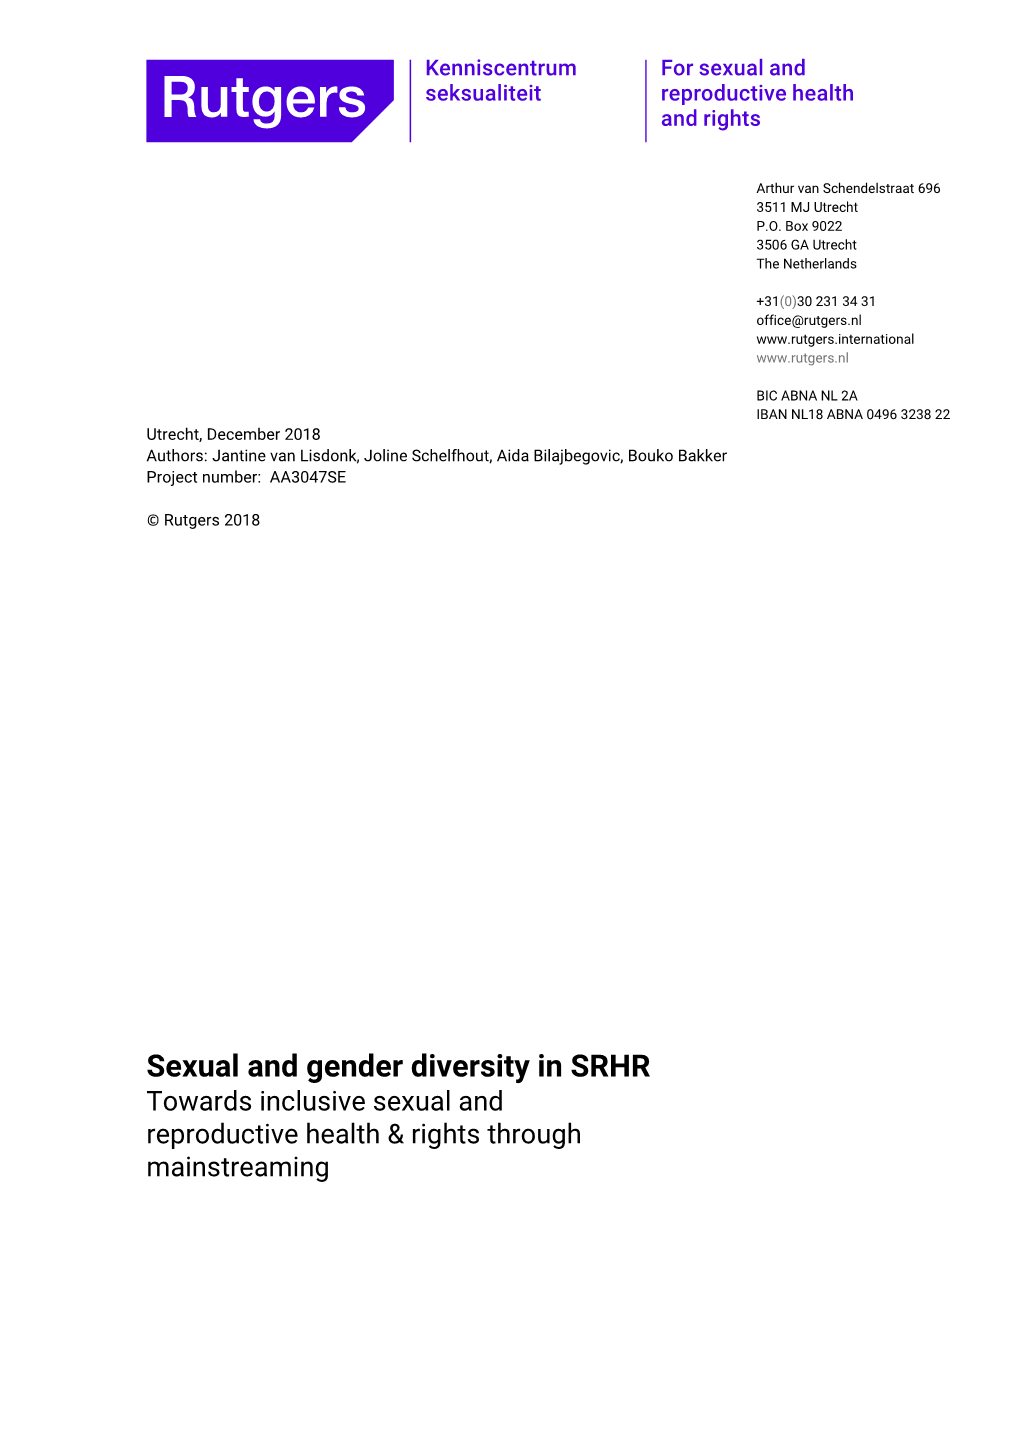 Sexual and Gender Diversity in SRHR Towards Inclusive Sexual and Reproductive Health & Rights Through Mainstreaming